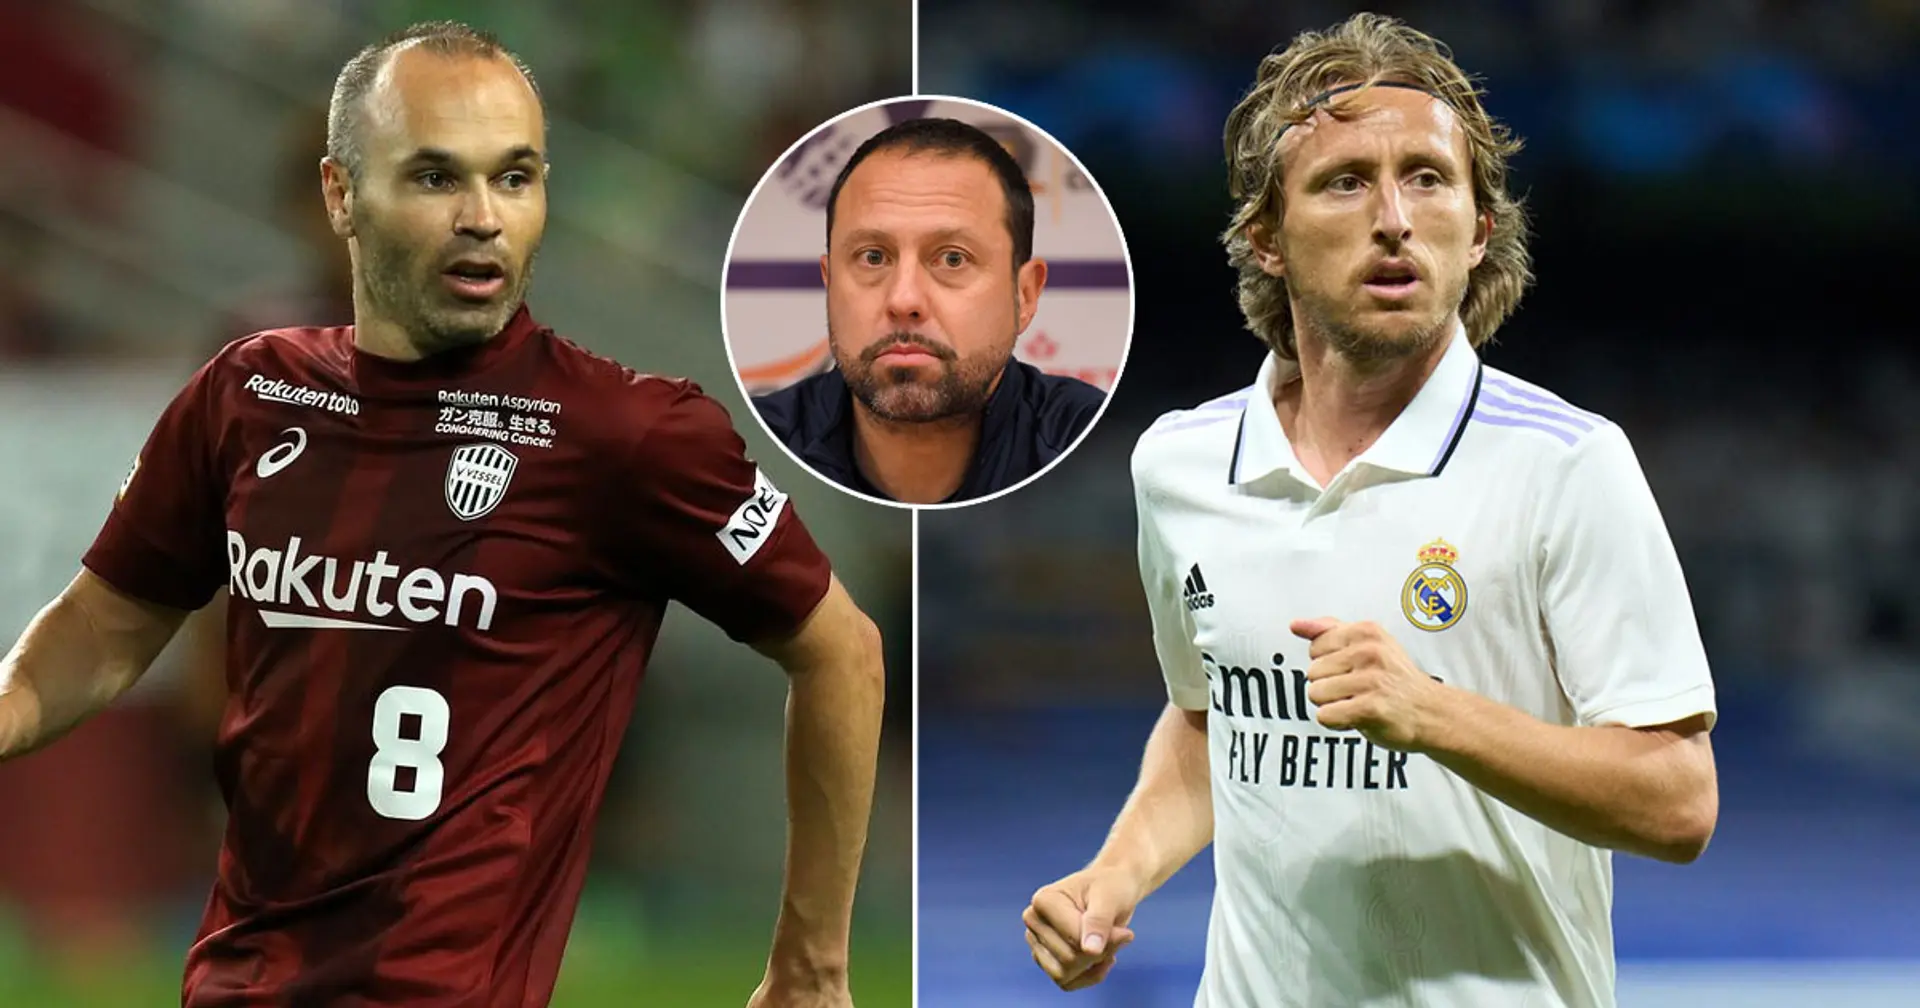 Shakhtar coach explains why Modric is better than Xavi and Iniesta